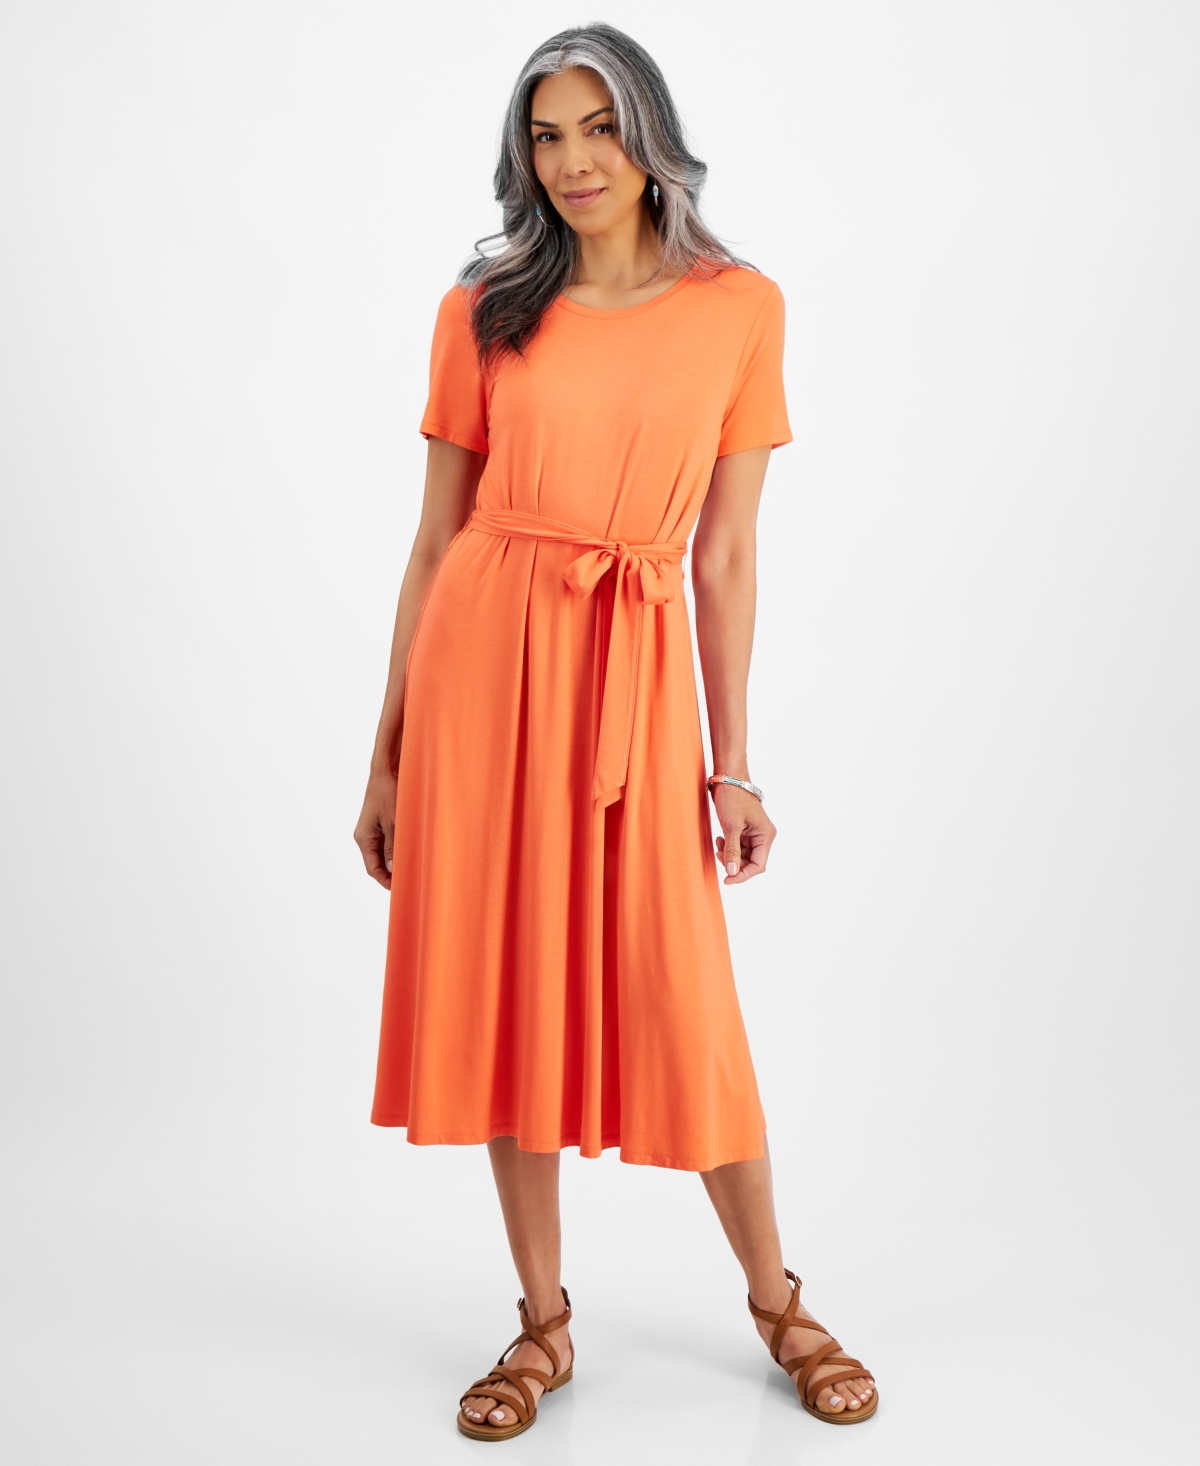 Women's Short-Sleeve T-Shirt Dress, Created for Macy's - Hot Coral